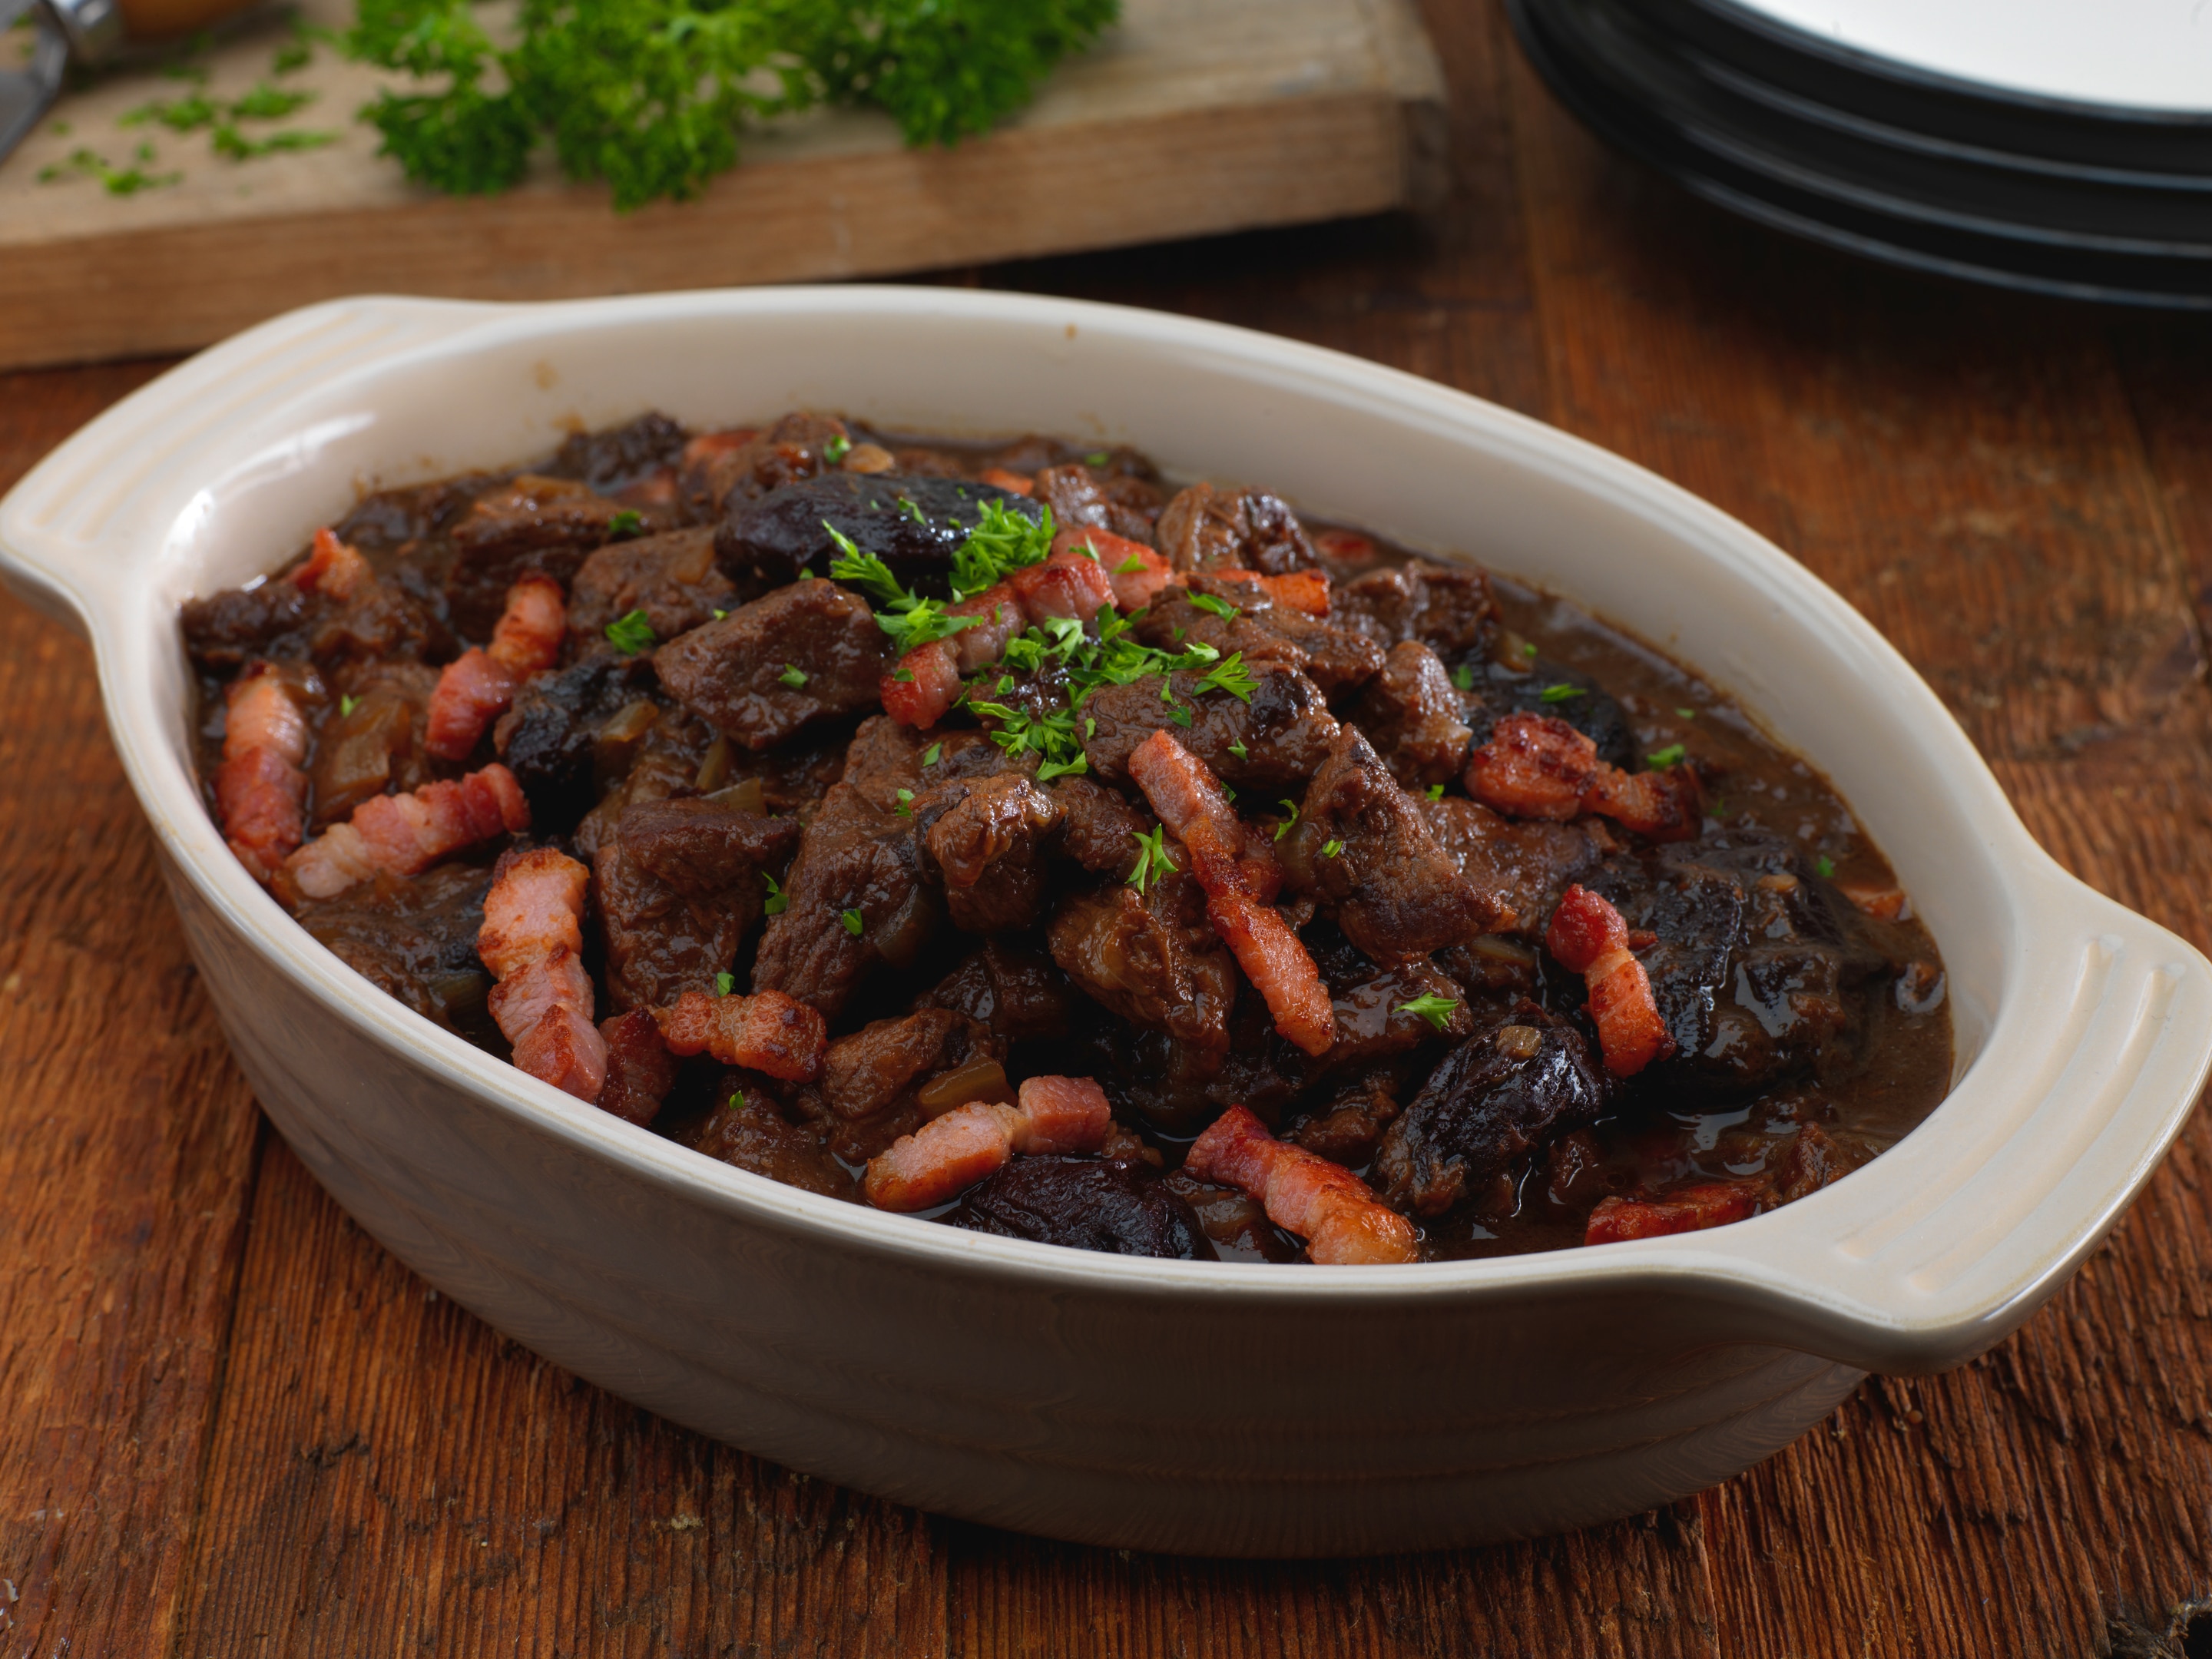 Beef and guinness stew with bacon and prunes